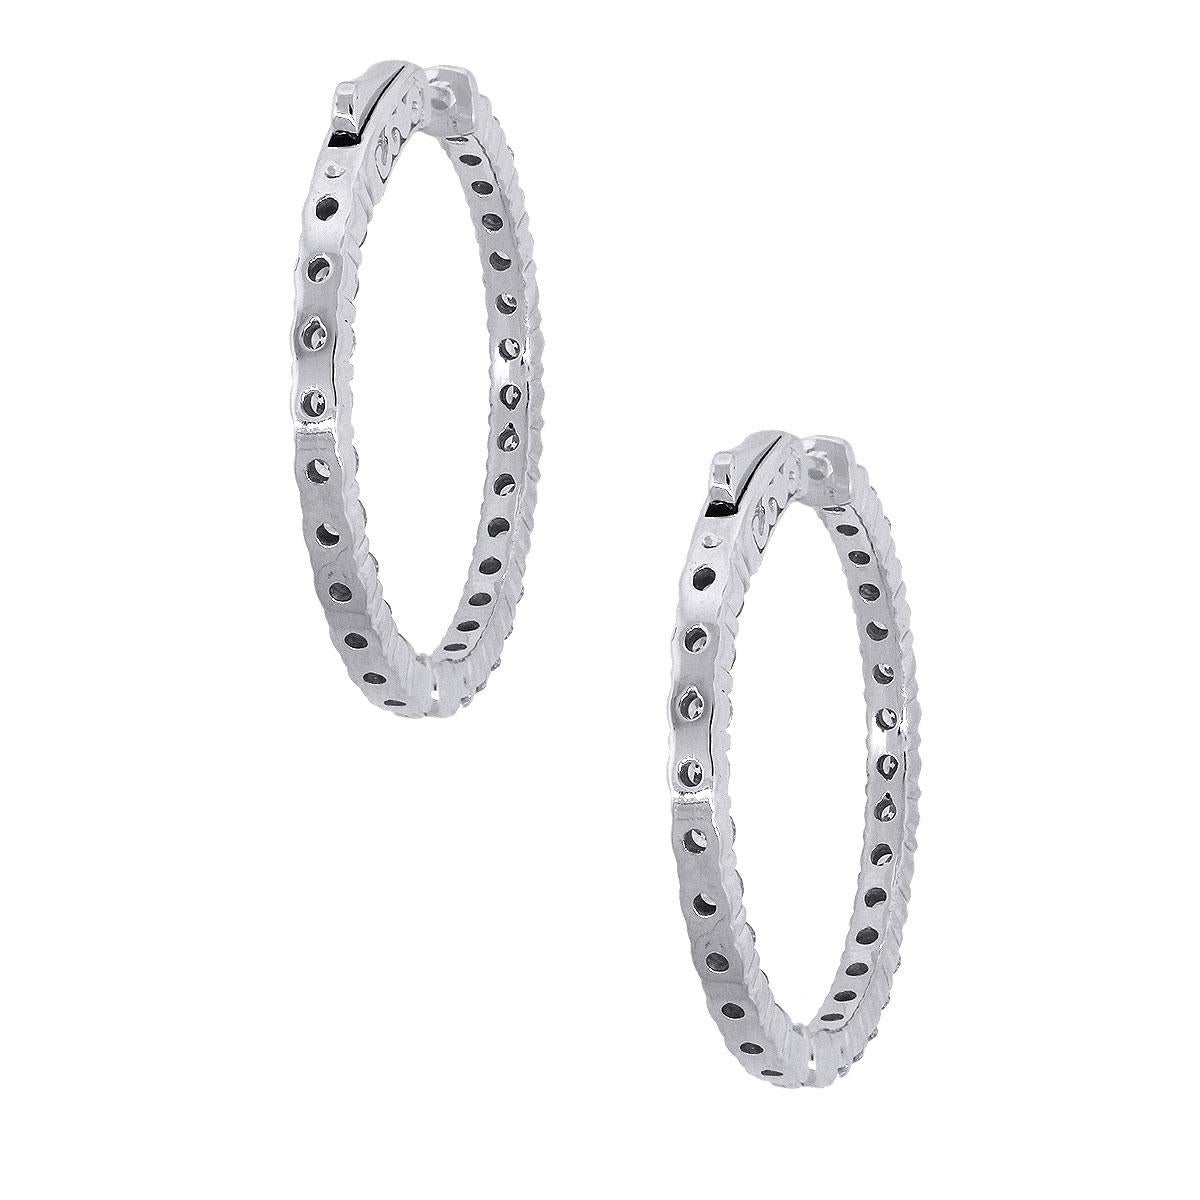 Material: 14k White Gold
Style: Diamond Inside Out Hoops
Diamond Details: Approximately 2.90ctw of round brilliant diamonds. Diamonds are G/H in color and SI in clarity.
Earring Measurements: 1.25″ x 0.12″ x 1.25″
Total Weight: 8.8g (5.7dwt)
Earring